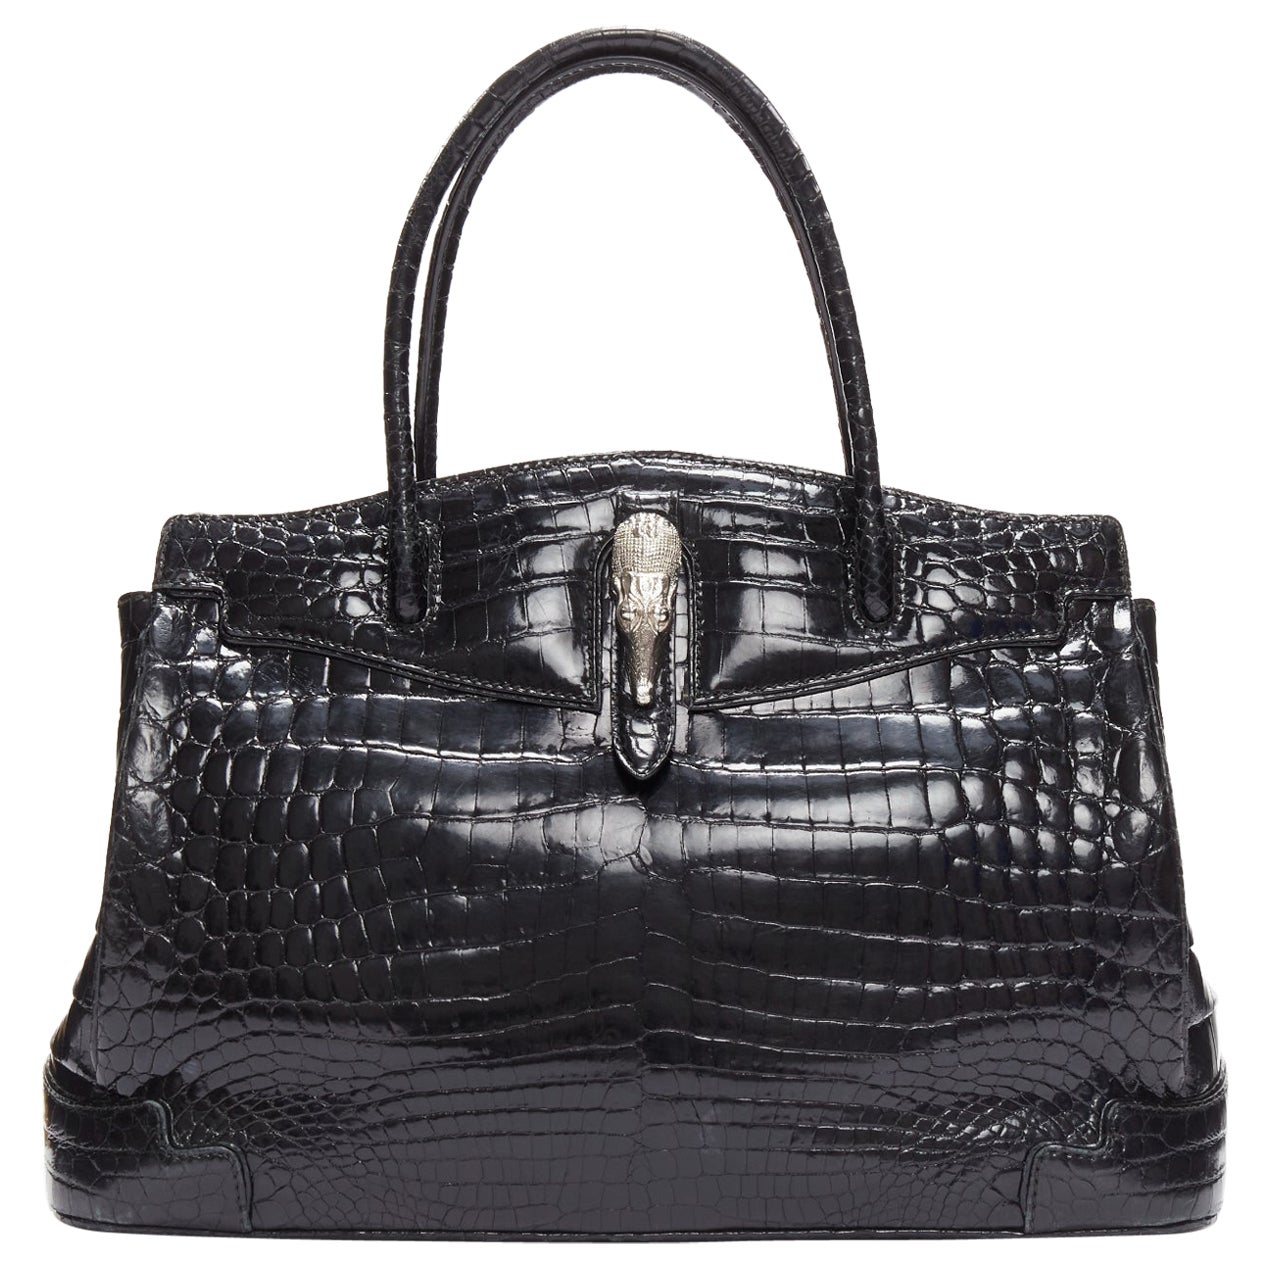 KWANPEN black polished scaled leather silver animal buckle executive tote bag